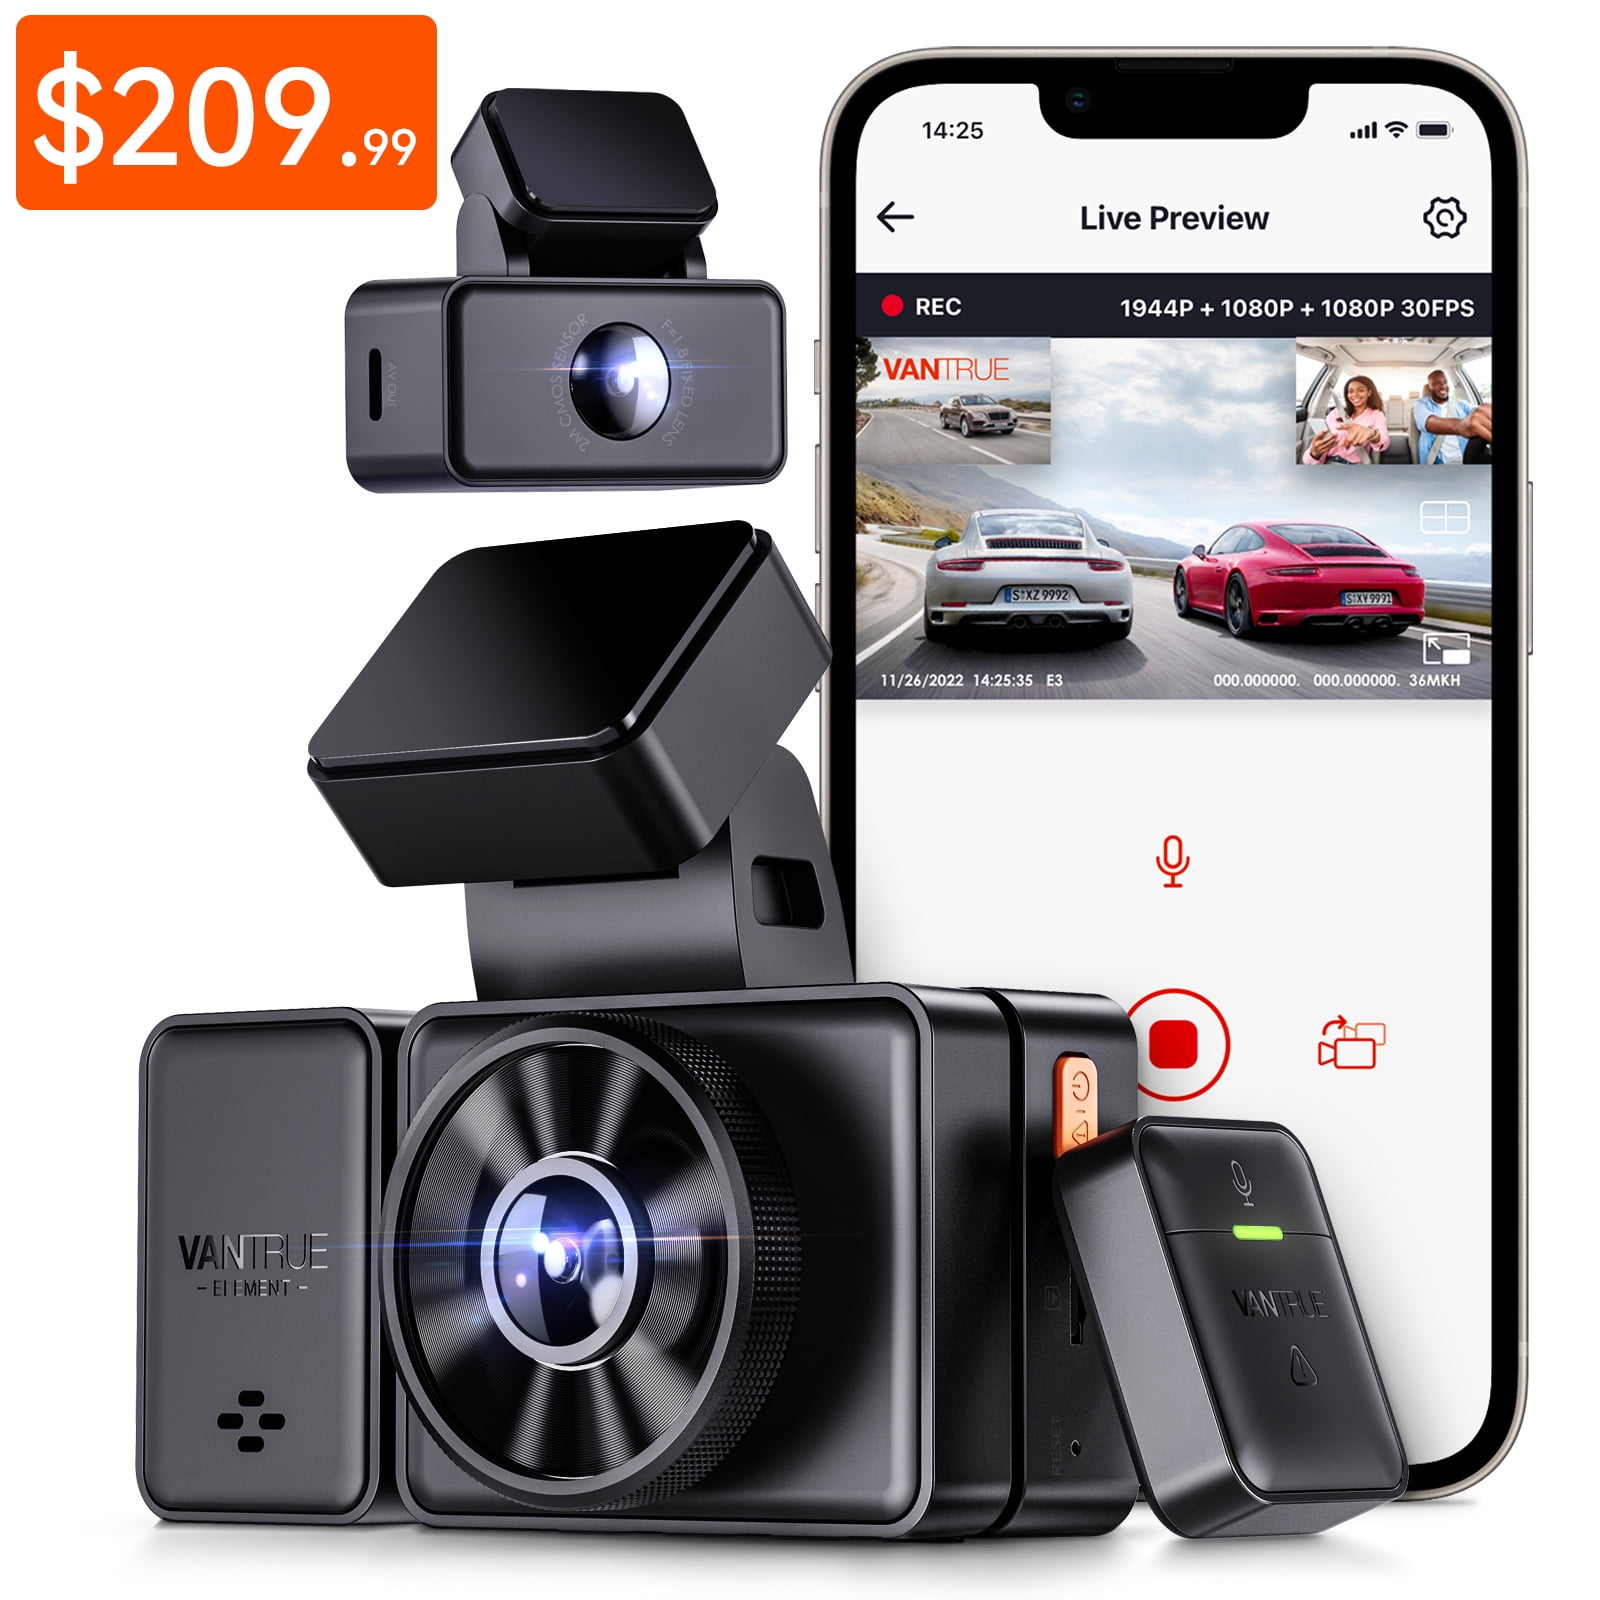 The Nextbase Dash Cam is on sale for 25% off